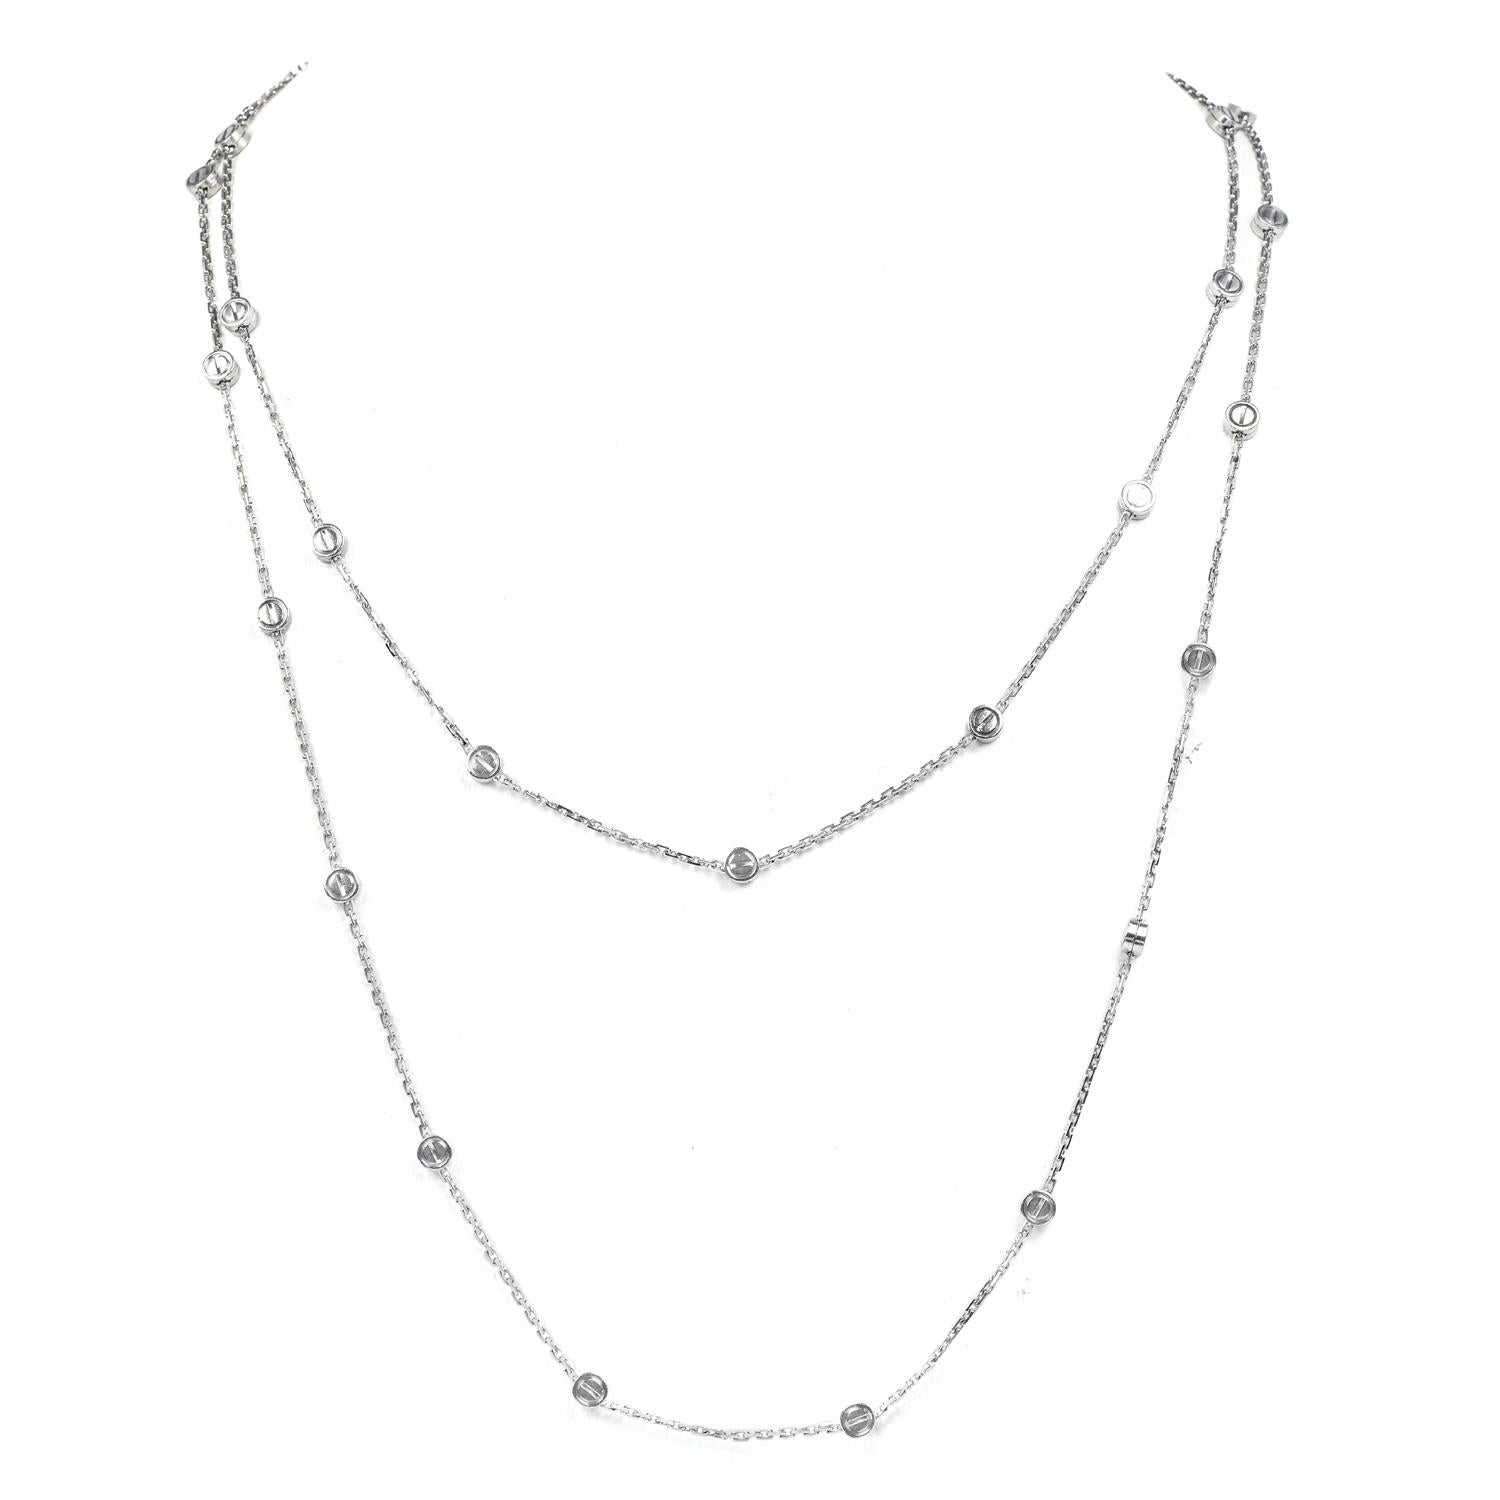 Collectable Vintage From Early 2000, this is a Cartier Love Screws Station Long White Gold Chain Necklace.

This is the perfect compliment to all the Cartier Love collections, crafted in solid 18K White gold.

It weighs 30.5 grams, measures 46”